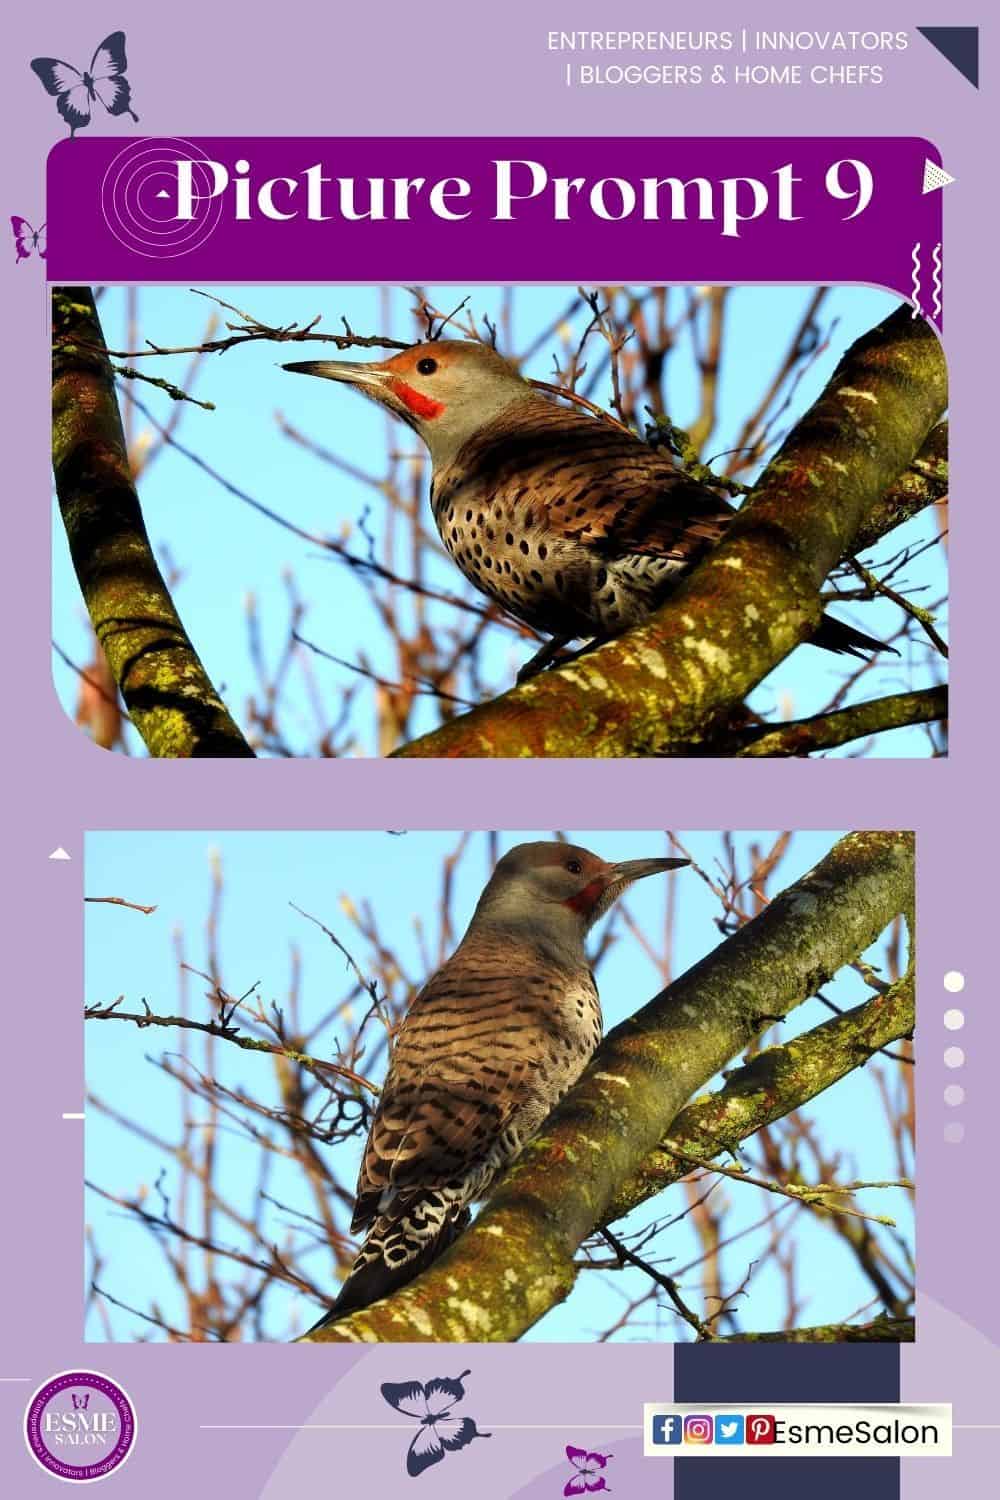 An image of 2 Picture Prompt 9 Northern Flickers